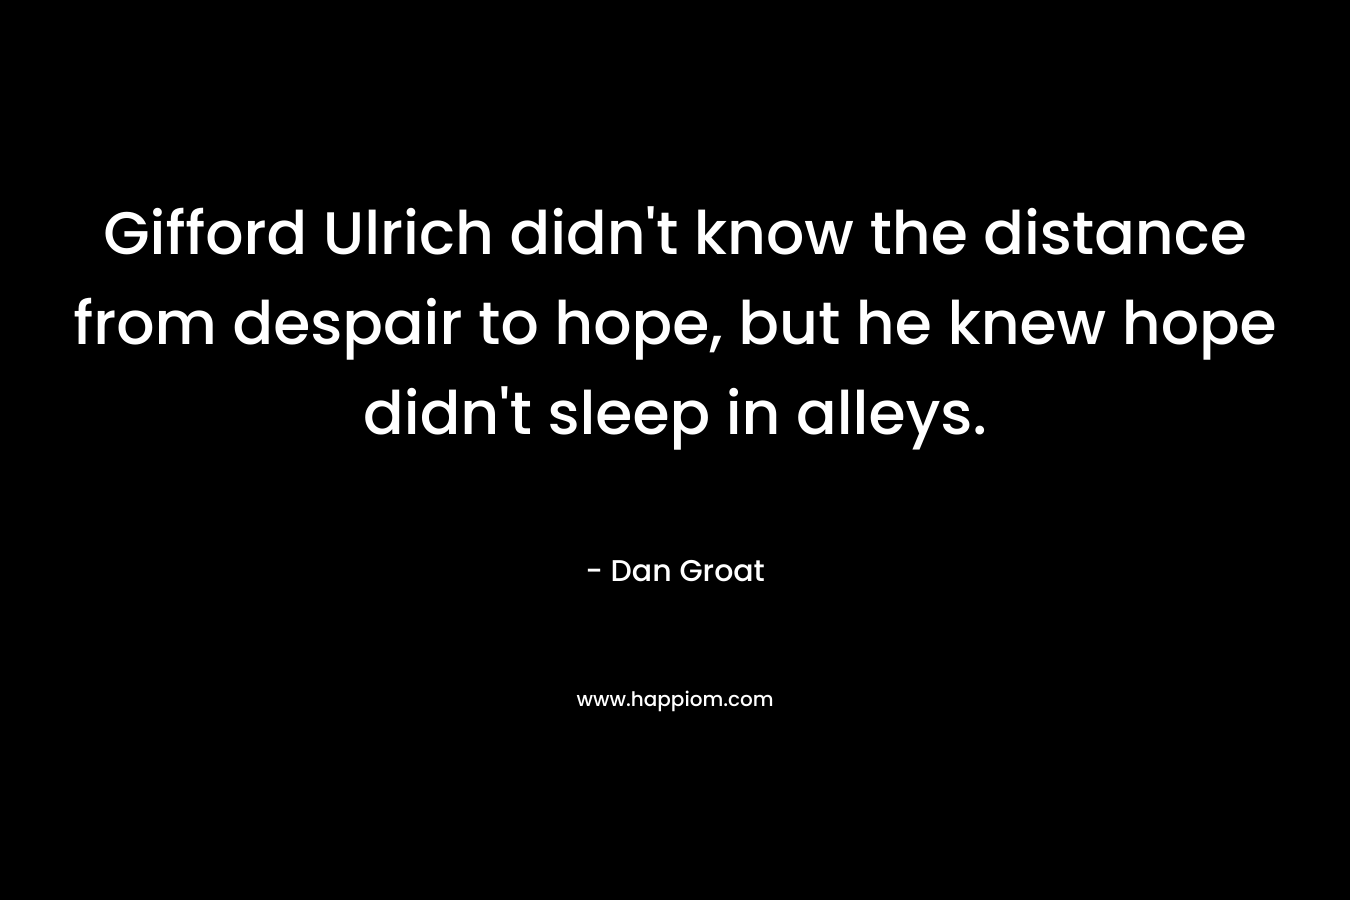 Gifford Ulrich didn't know the distance from despair to hope, but he knew hope didn't sleep in alleys.